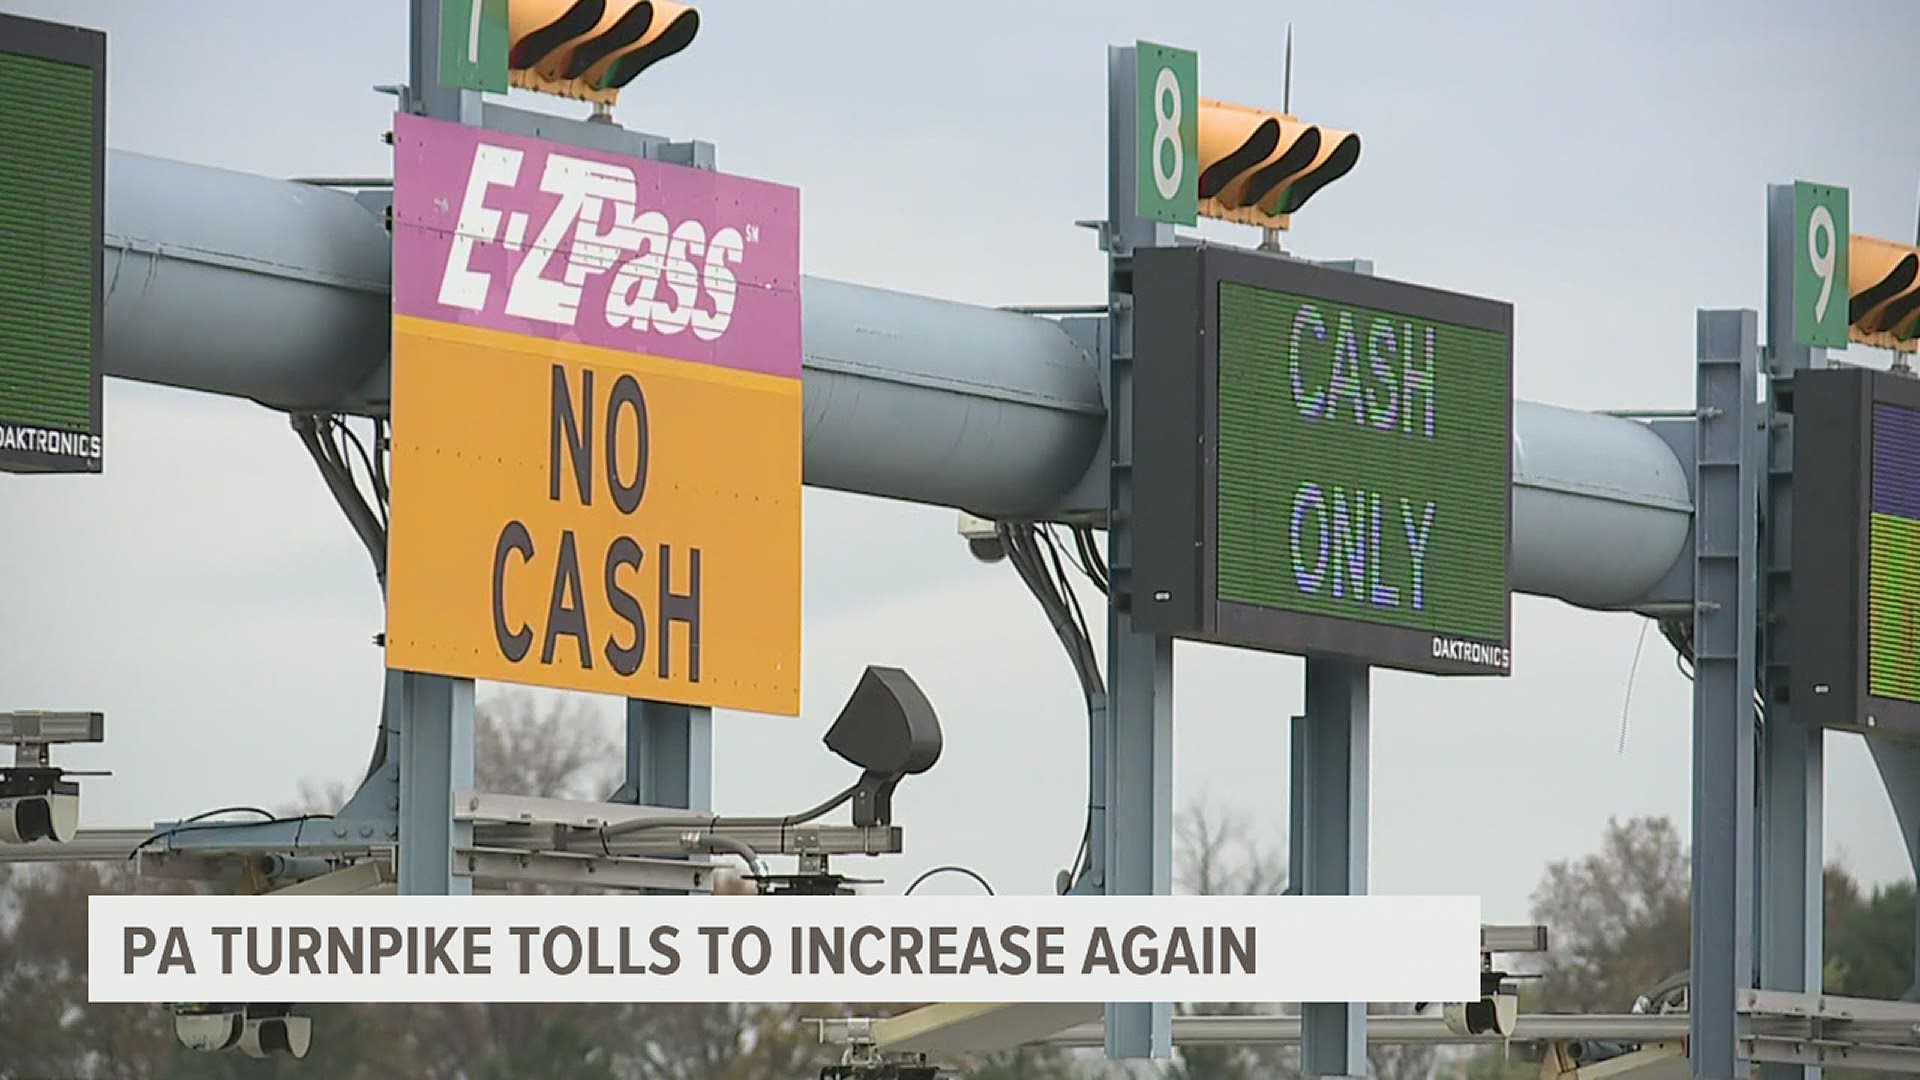 It's the first time in several years the increase will fall below 6%. Tolls will increase by 5% every year through 2025. By 2050, the yearly increase will be 3%.